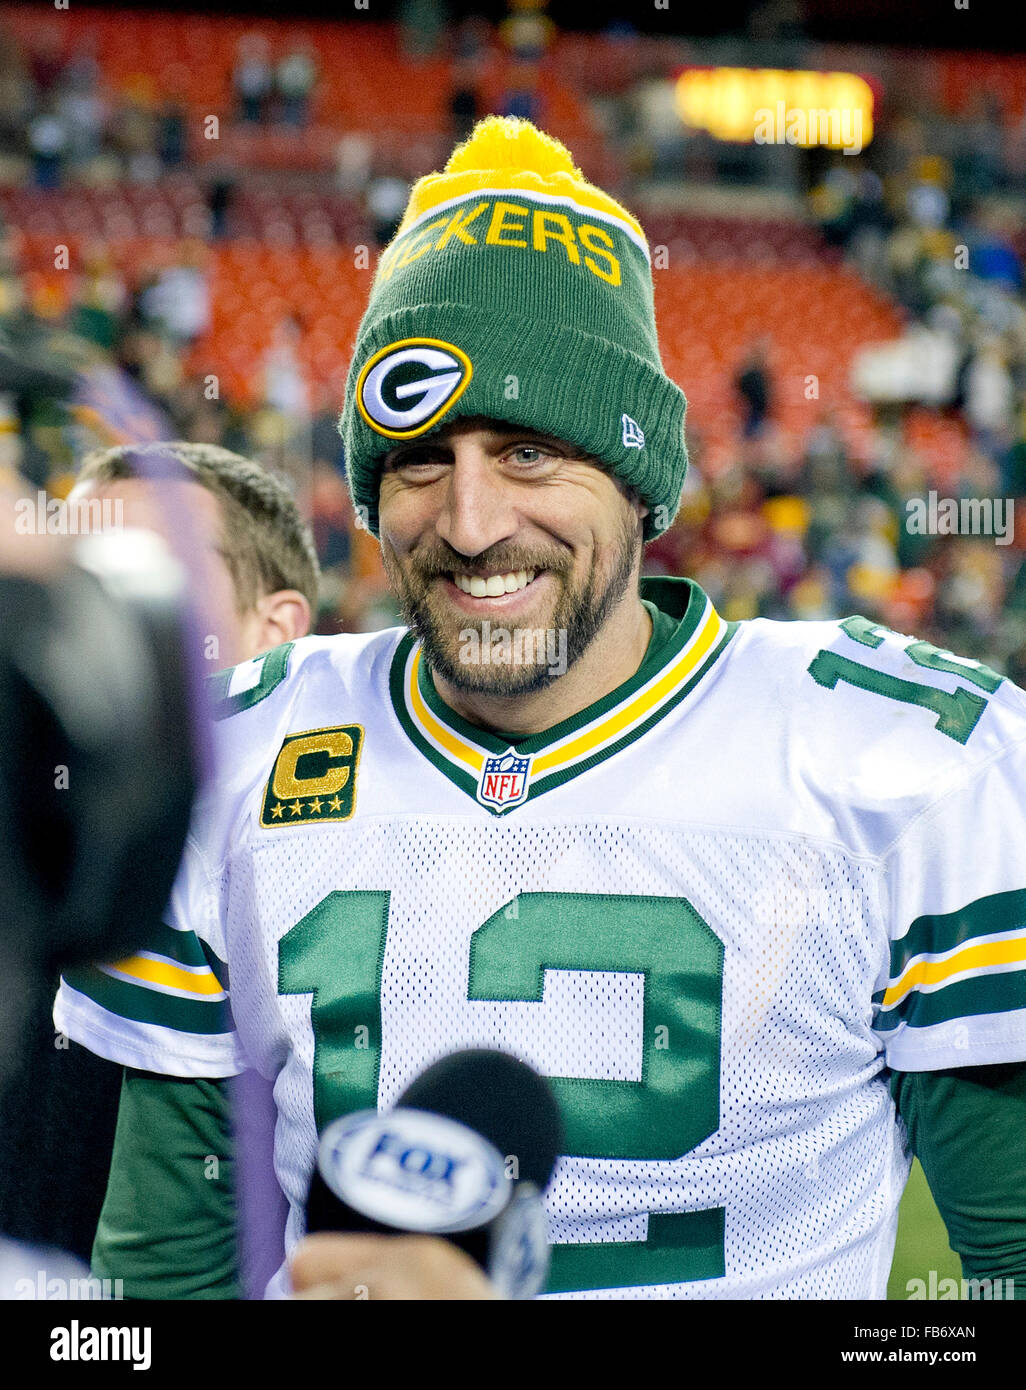 Green Bay Packers quarterback Aaron Rodgers (12) is all smiles as he prepares to be interviewed following his team's 35 - 18 victory over Washington Redskins in an NFC Wild Card game at FedEx Field in Landover, Maryland on Sunday, January 10, 2016. Credit: Ron Sachs/CNP - NO WIRE SERVICE - EDITORIAL USE ONLY unless licensed by the NFL Stock Photo